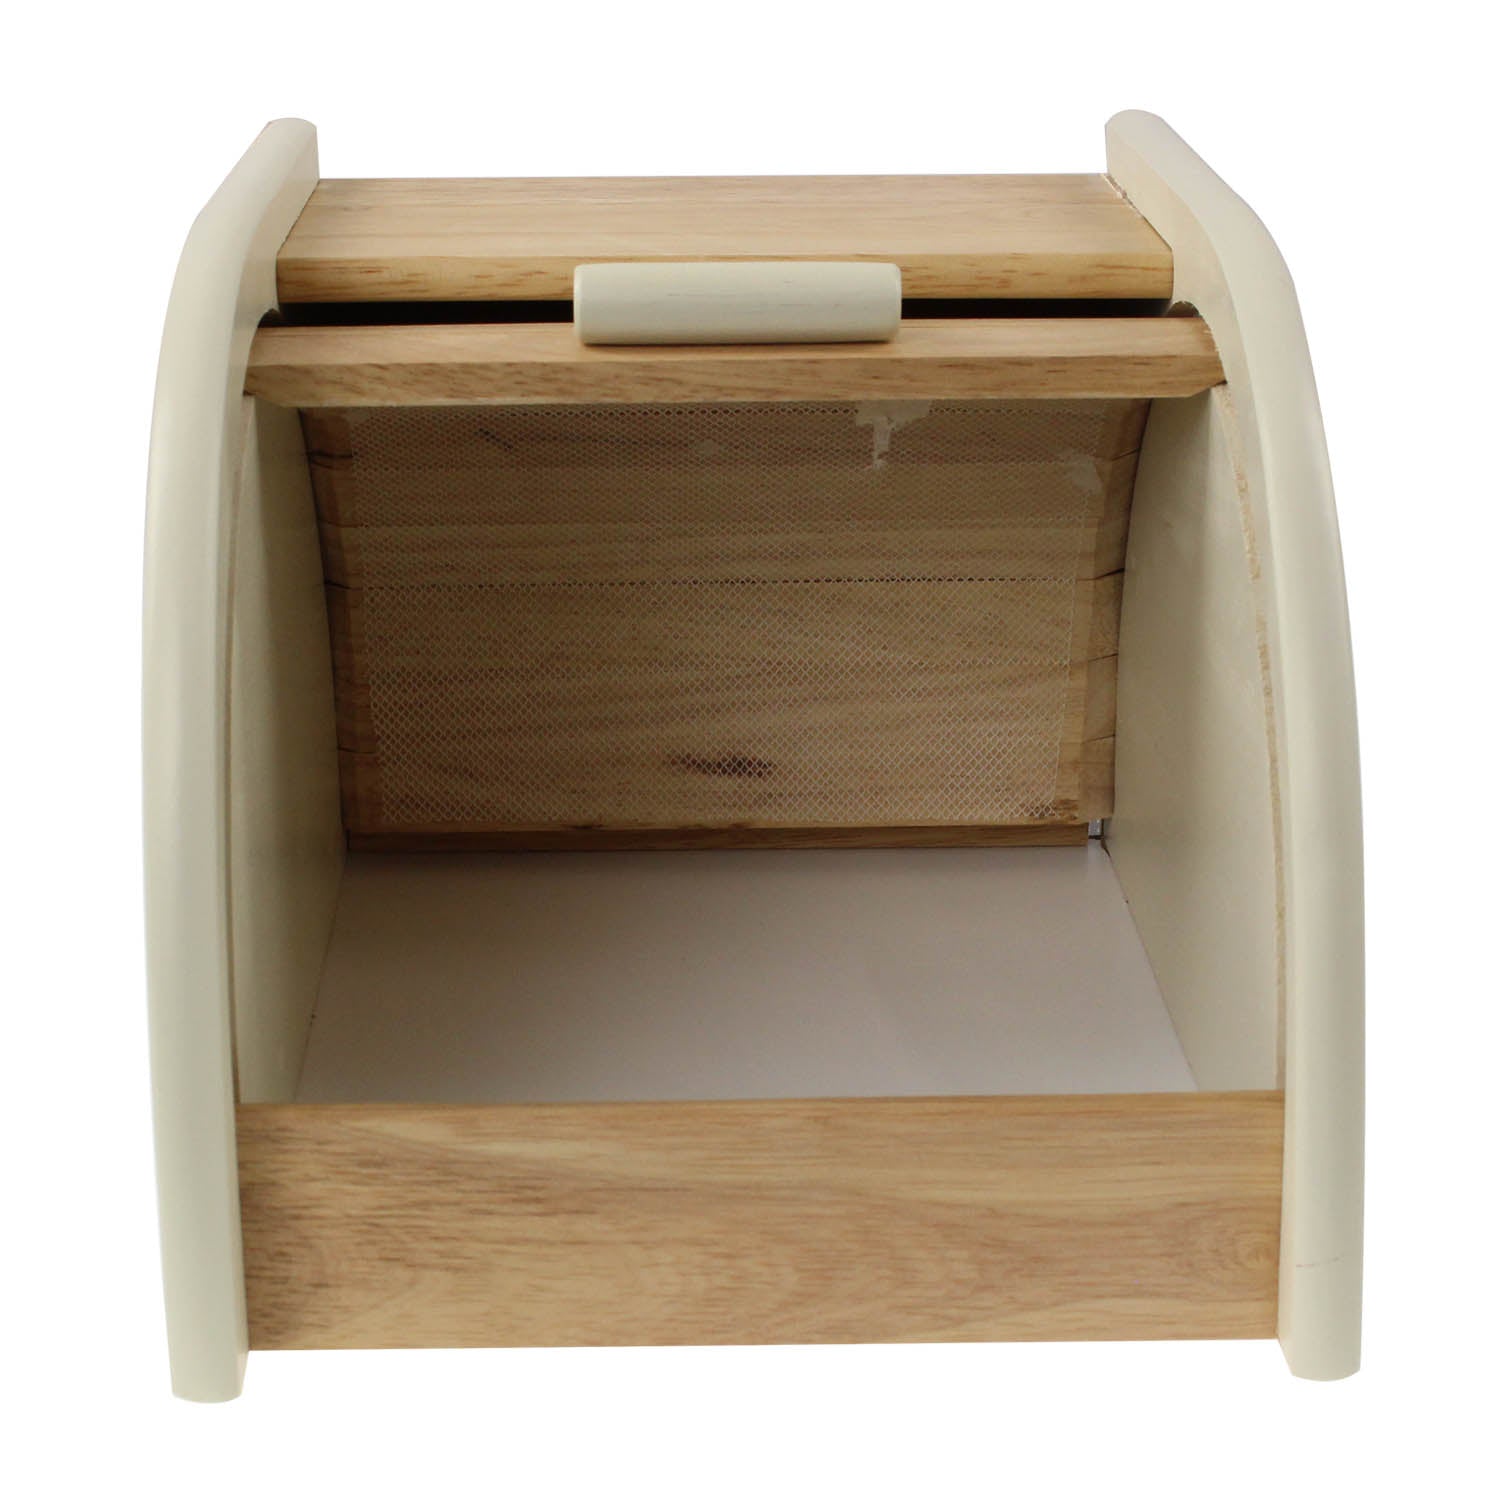 Cream Rubberwood Roll Top Wooden Bread Bin Kitchen Loaf Container - Bonnypack